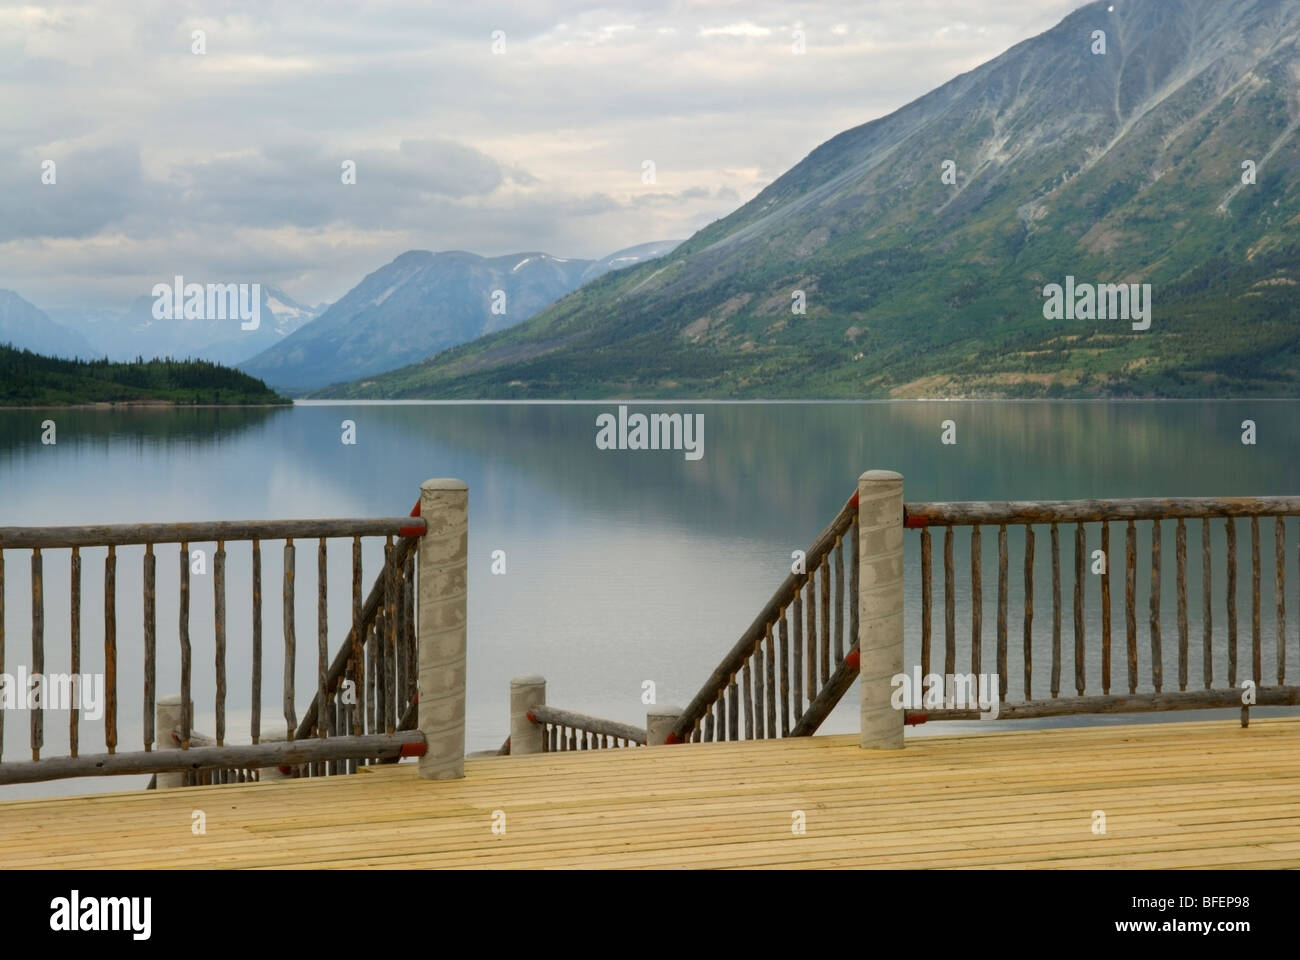 Le Lac Bennett, Carcross, Yukon Territory, Canada Banque D'Images